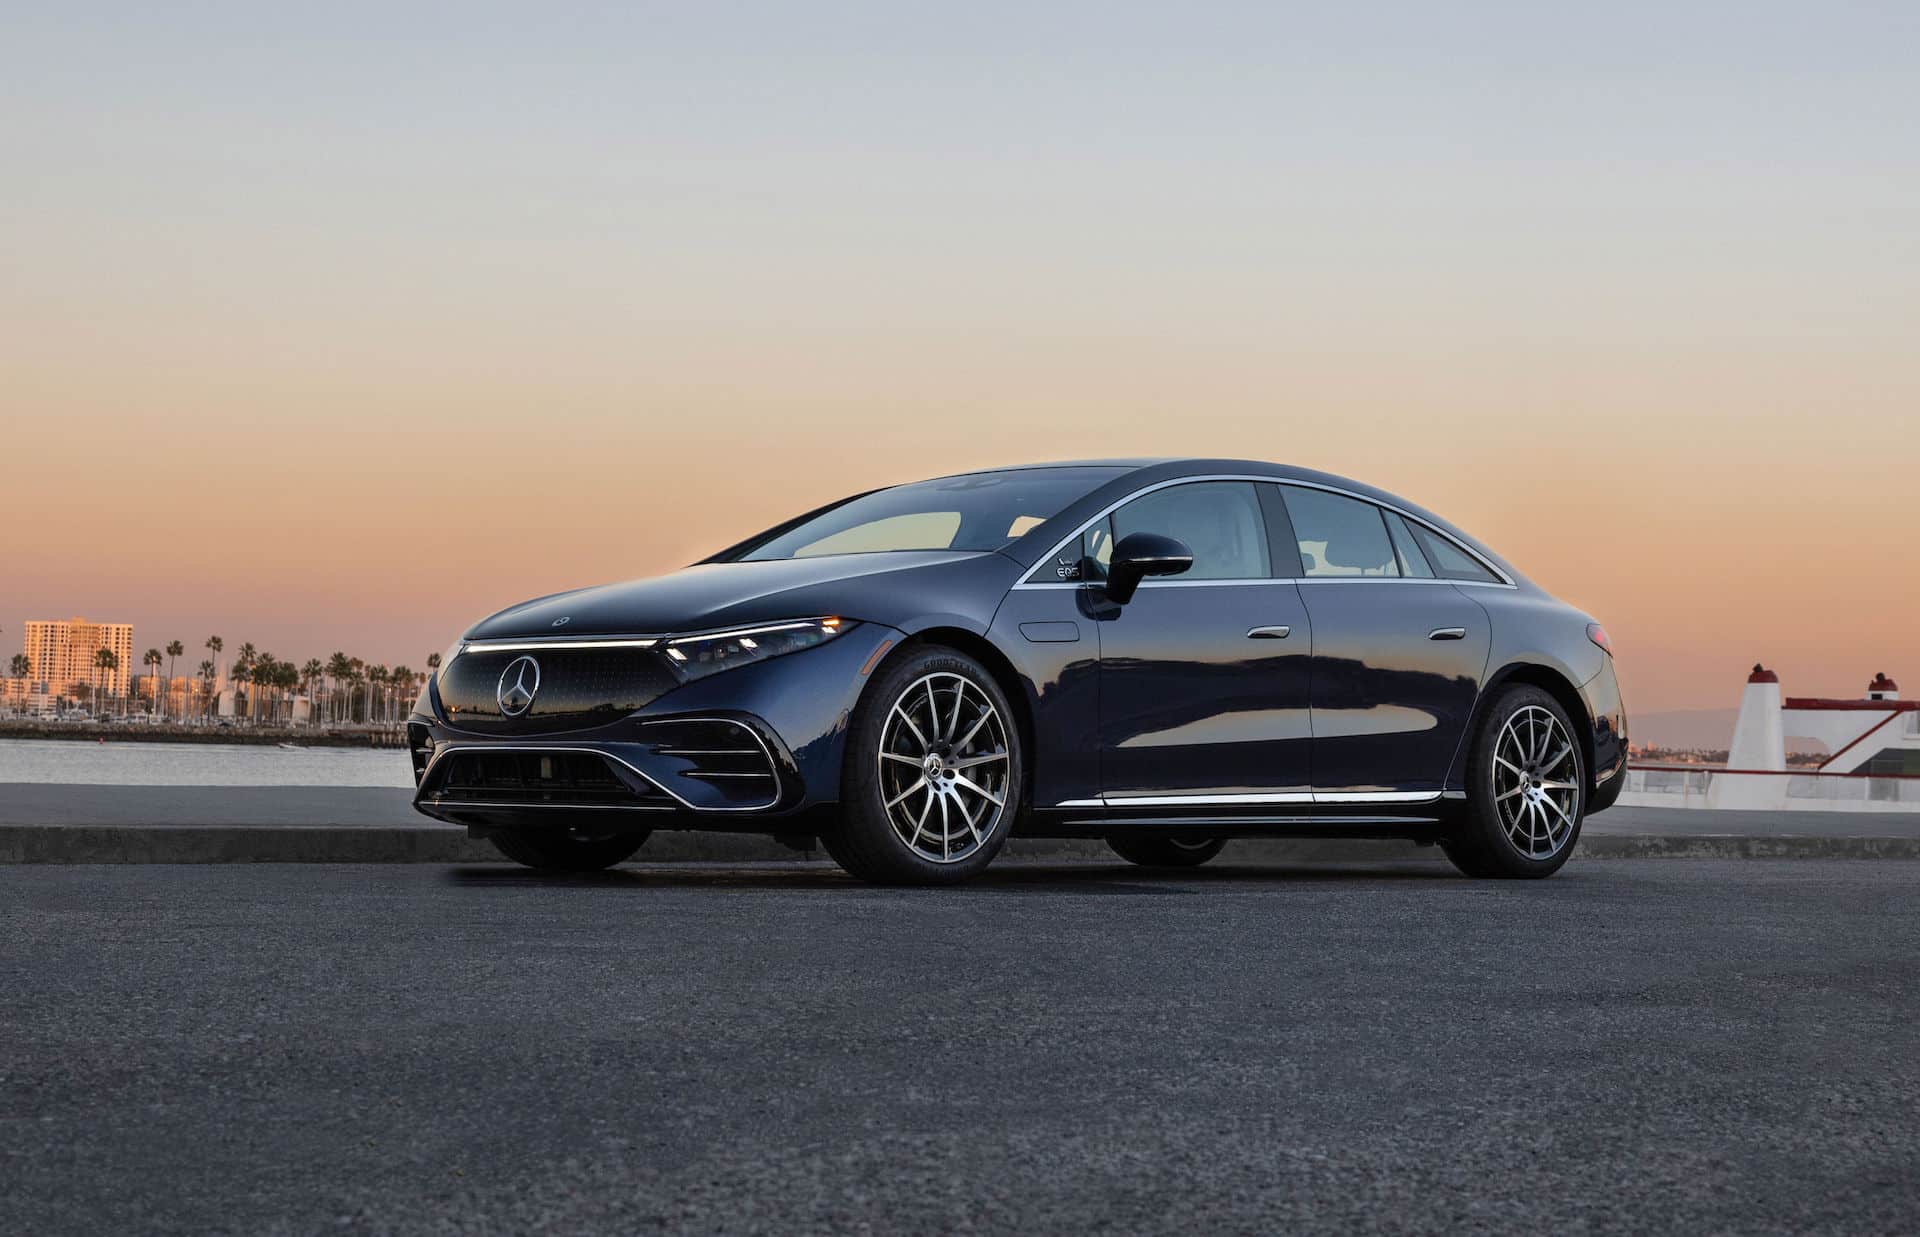 Mercedes-Benz USA Unveils Limited Edition EQS 580 4MATIC Sedan City Edition in Los Angeles